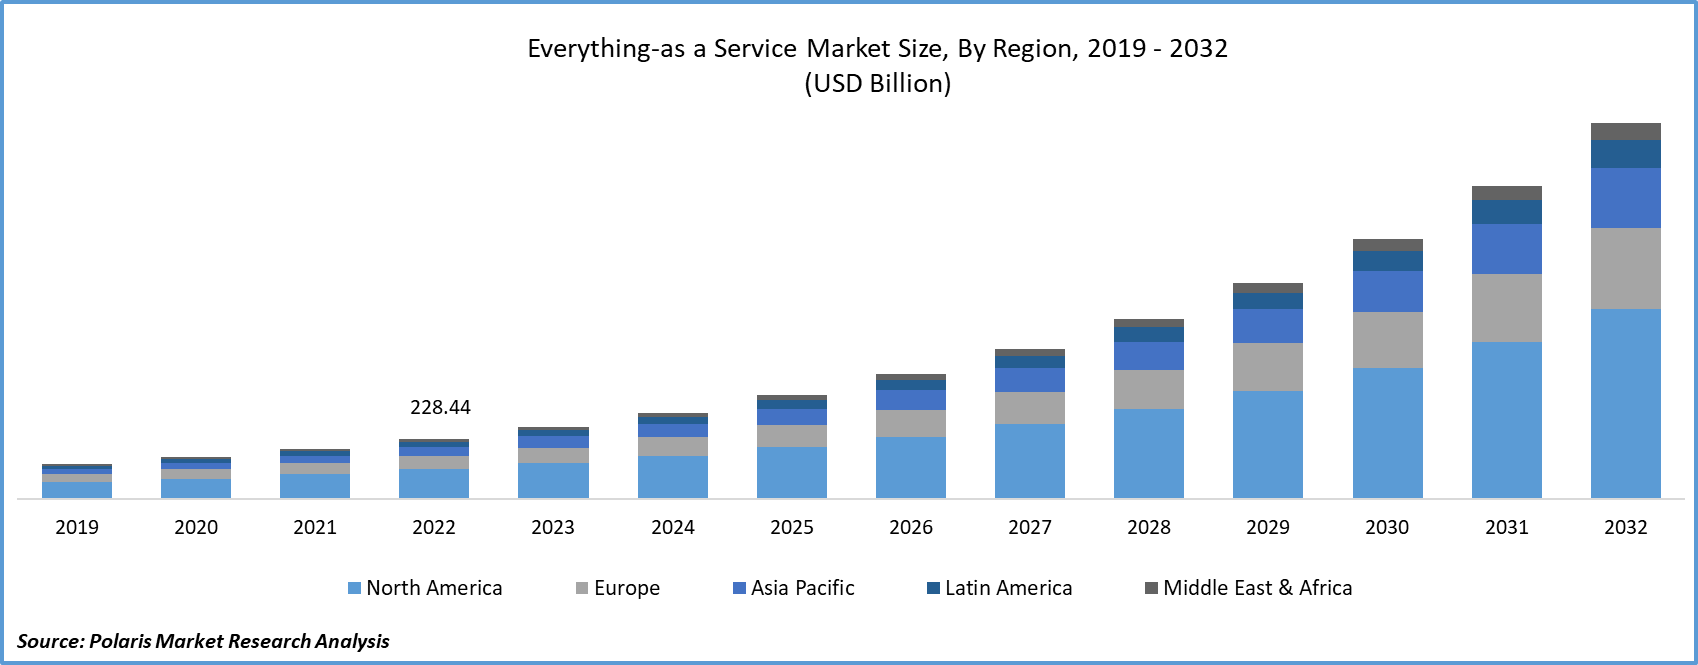 Everything-as a Service Market Size